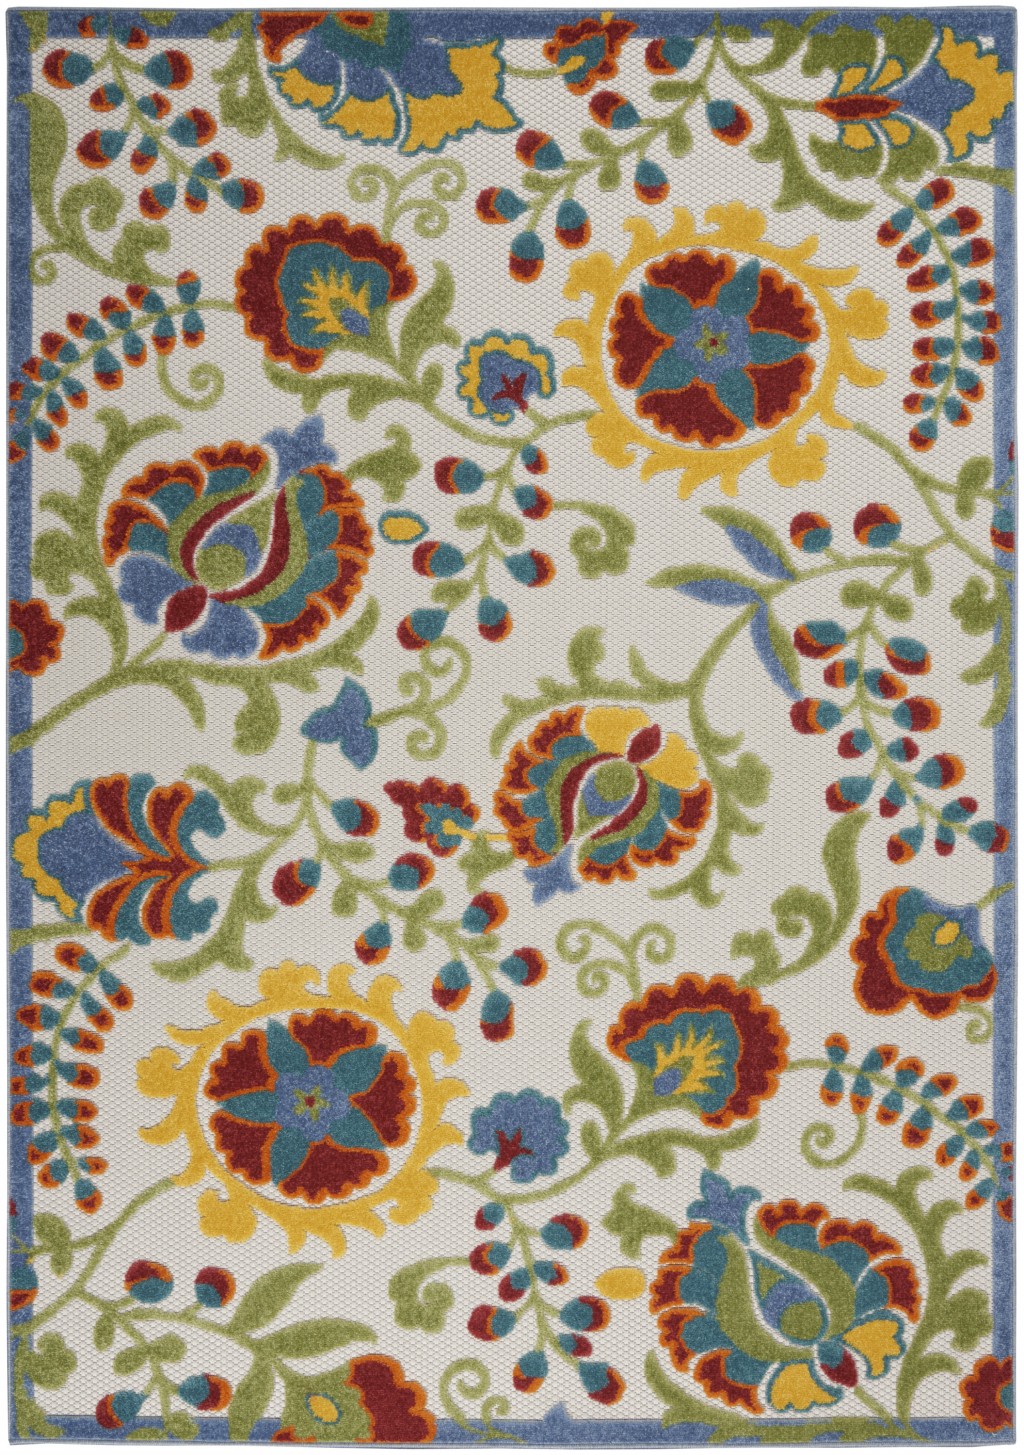 4' X 6' Ivory/Multi Floral Indoor Outdoor Area Rug-384844-1